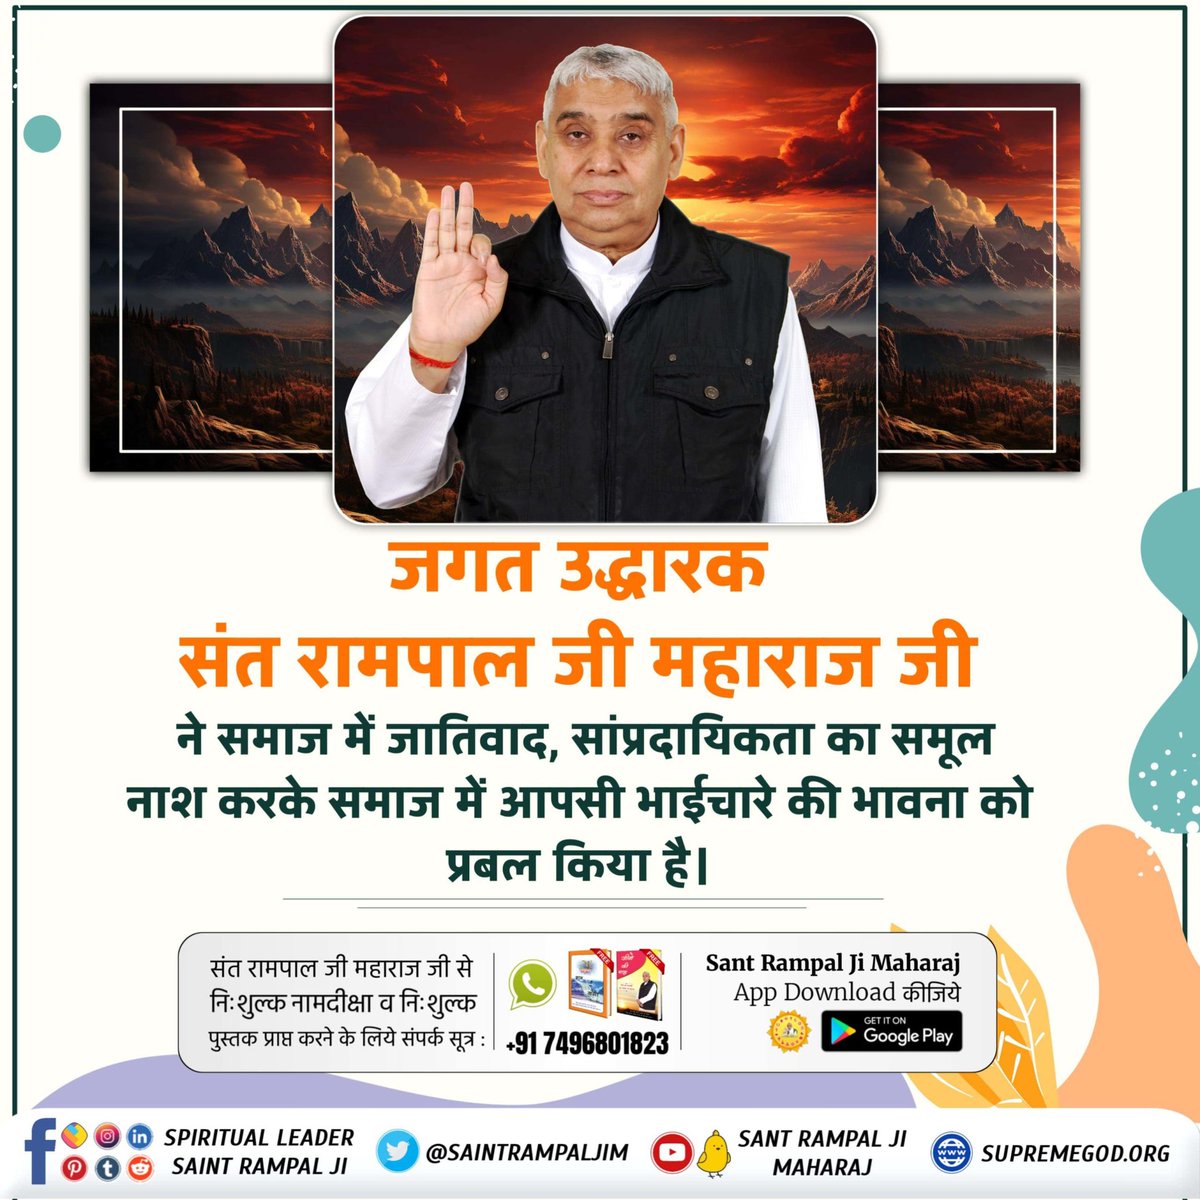 Who is the biggest Social Reformer of India? Sant Rampal Ji Maharaj is the biggest social reformer of India and World who has freed the country from the problems of dowry, feticide, casteism, bribery etc. #जगत_उद्धारक_संत_रामपालजी Saviour Of The World